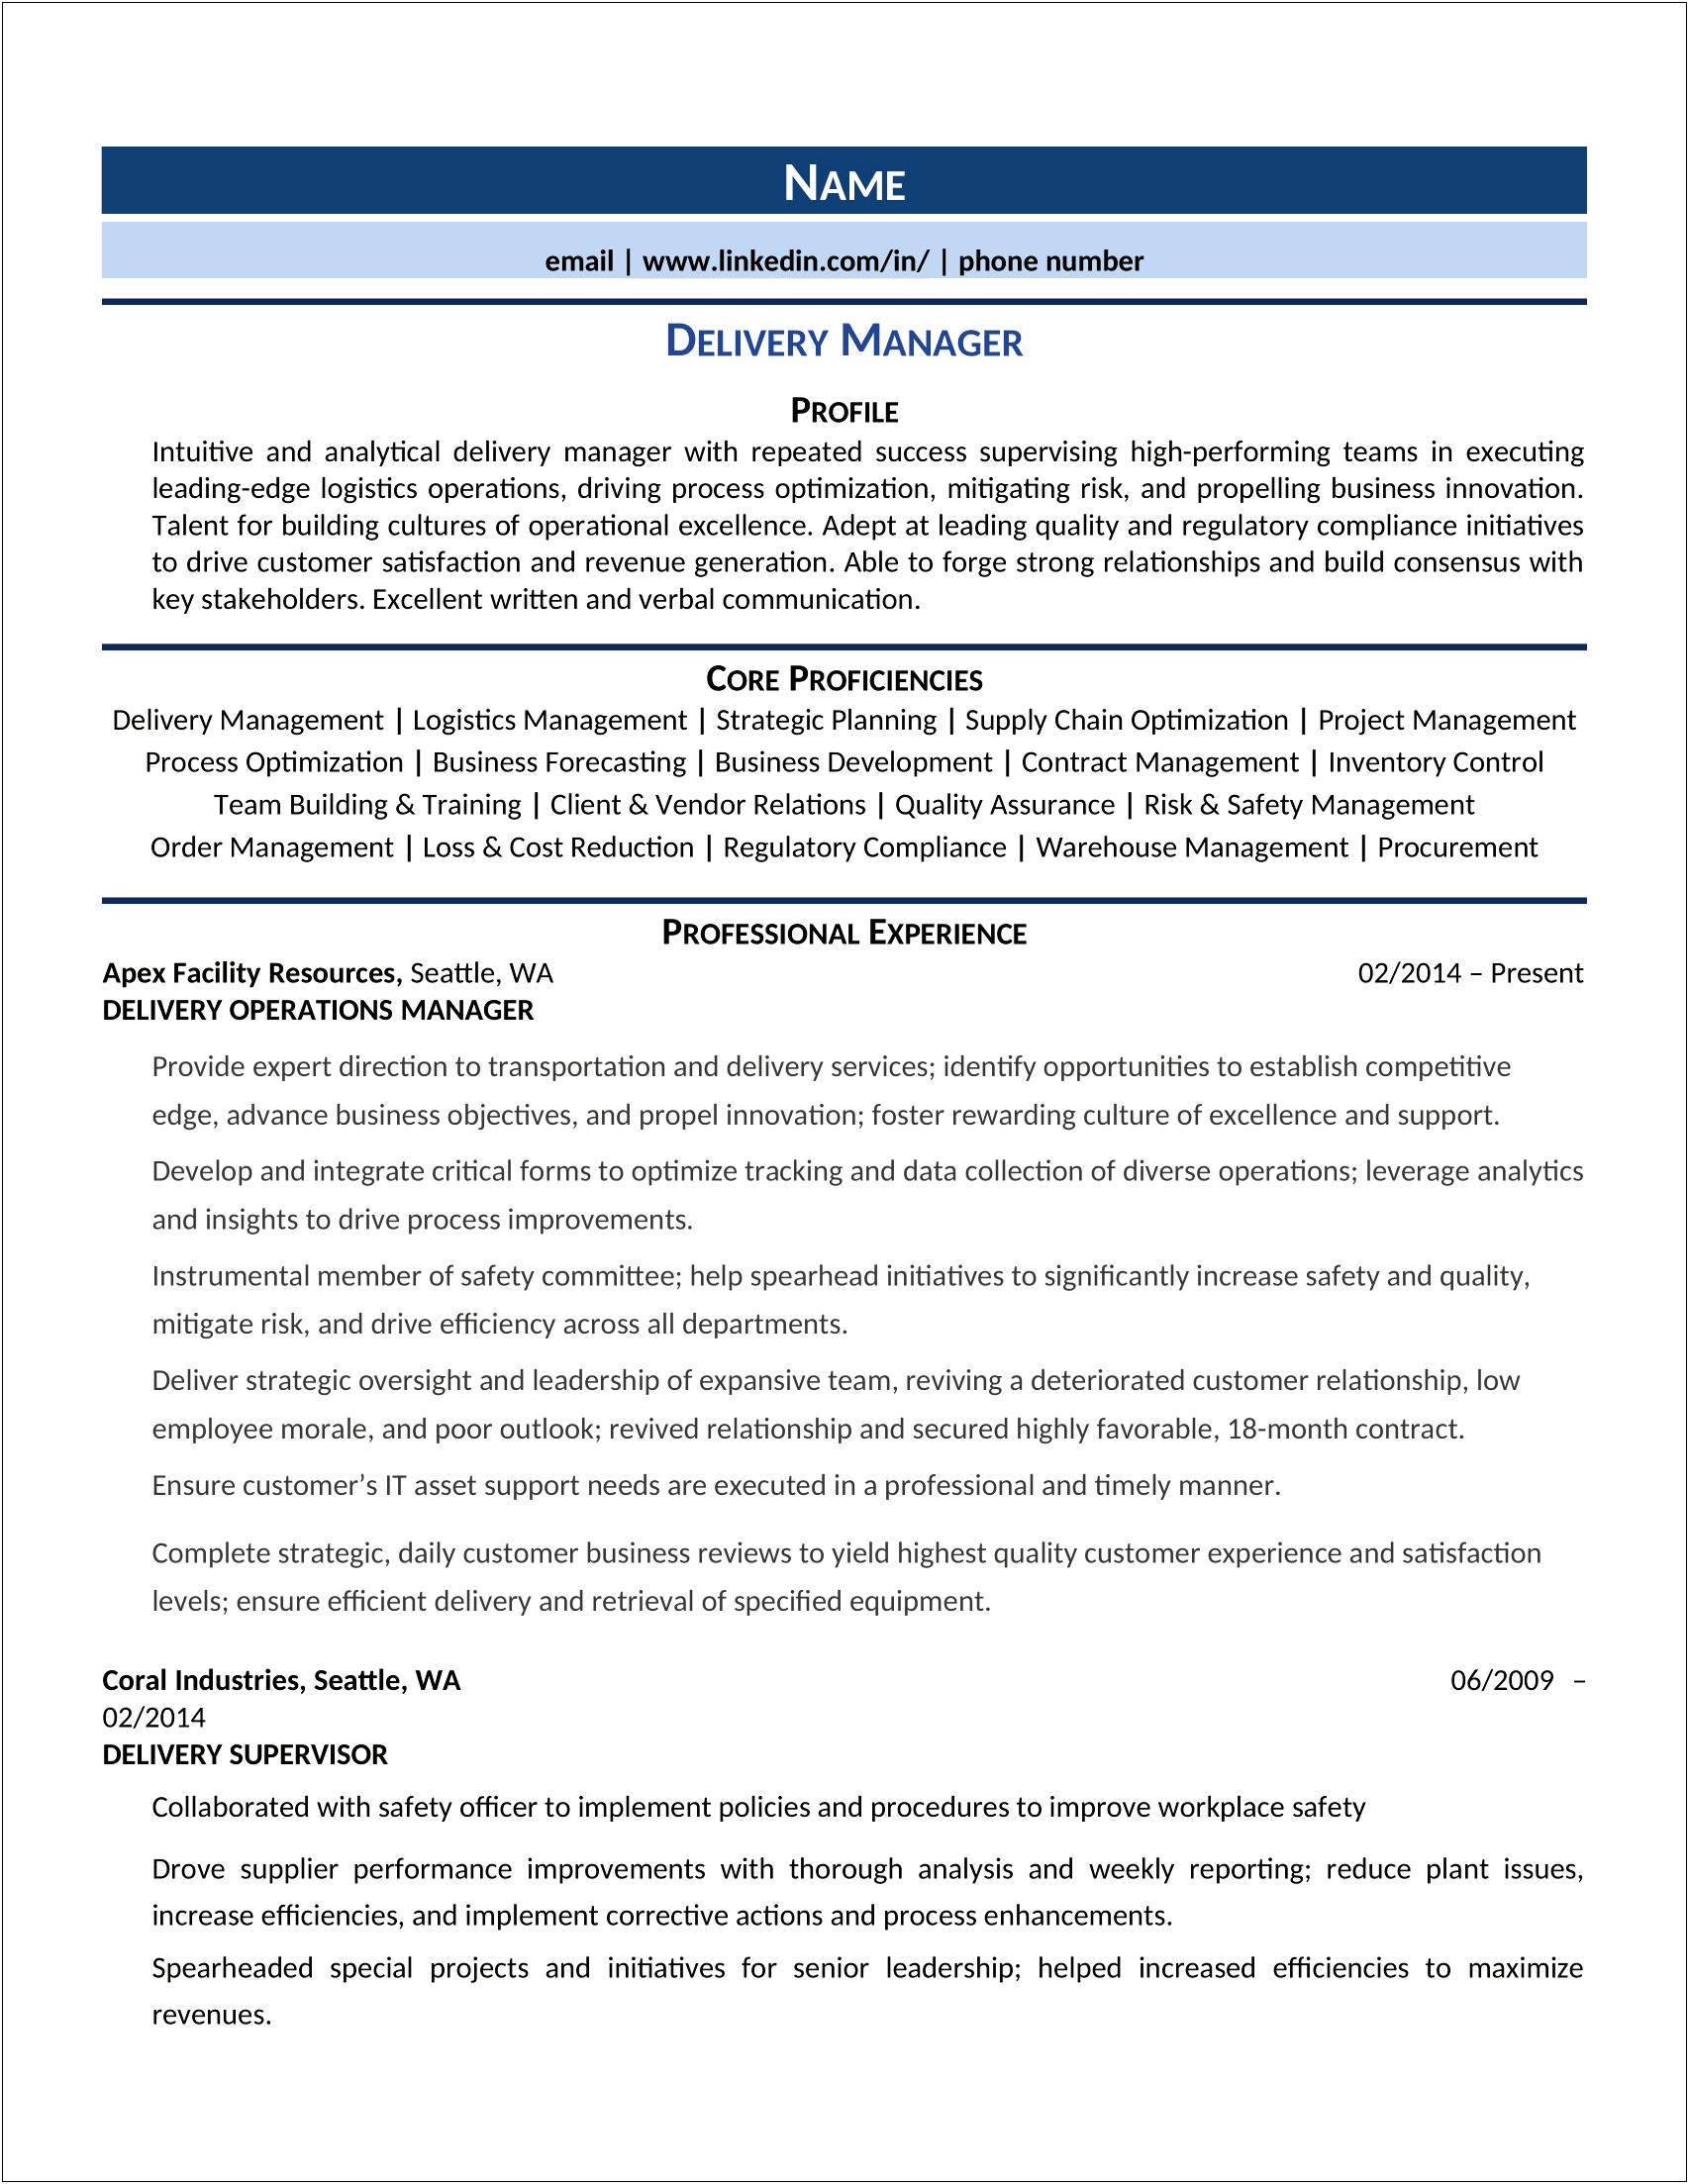 Resume Summary Supply Chain Examples